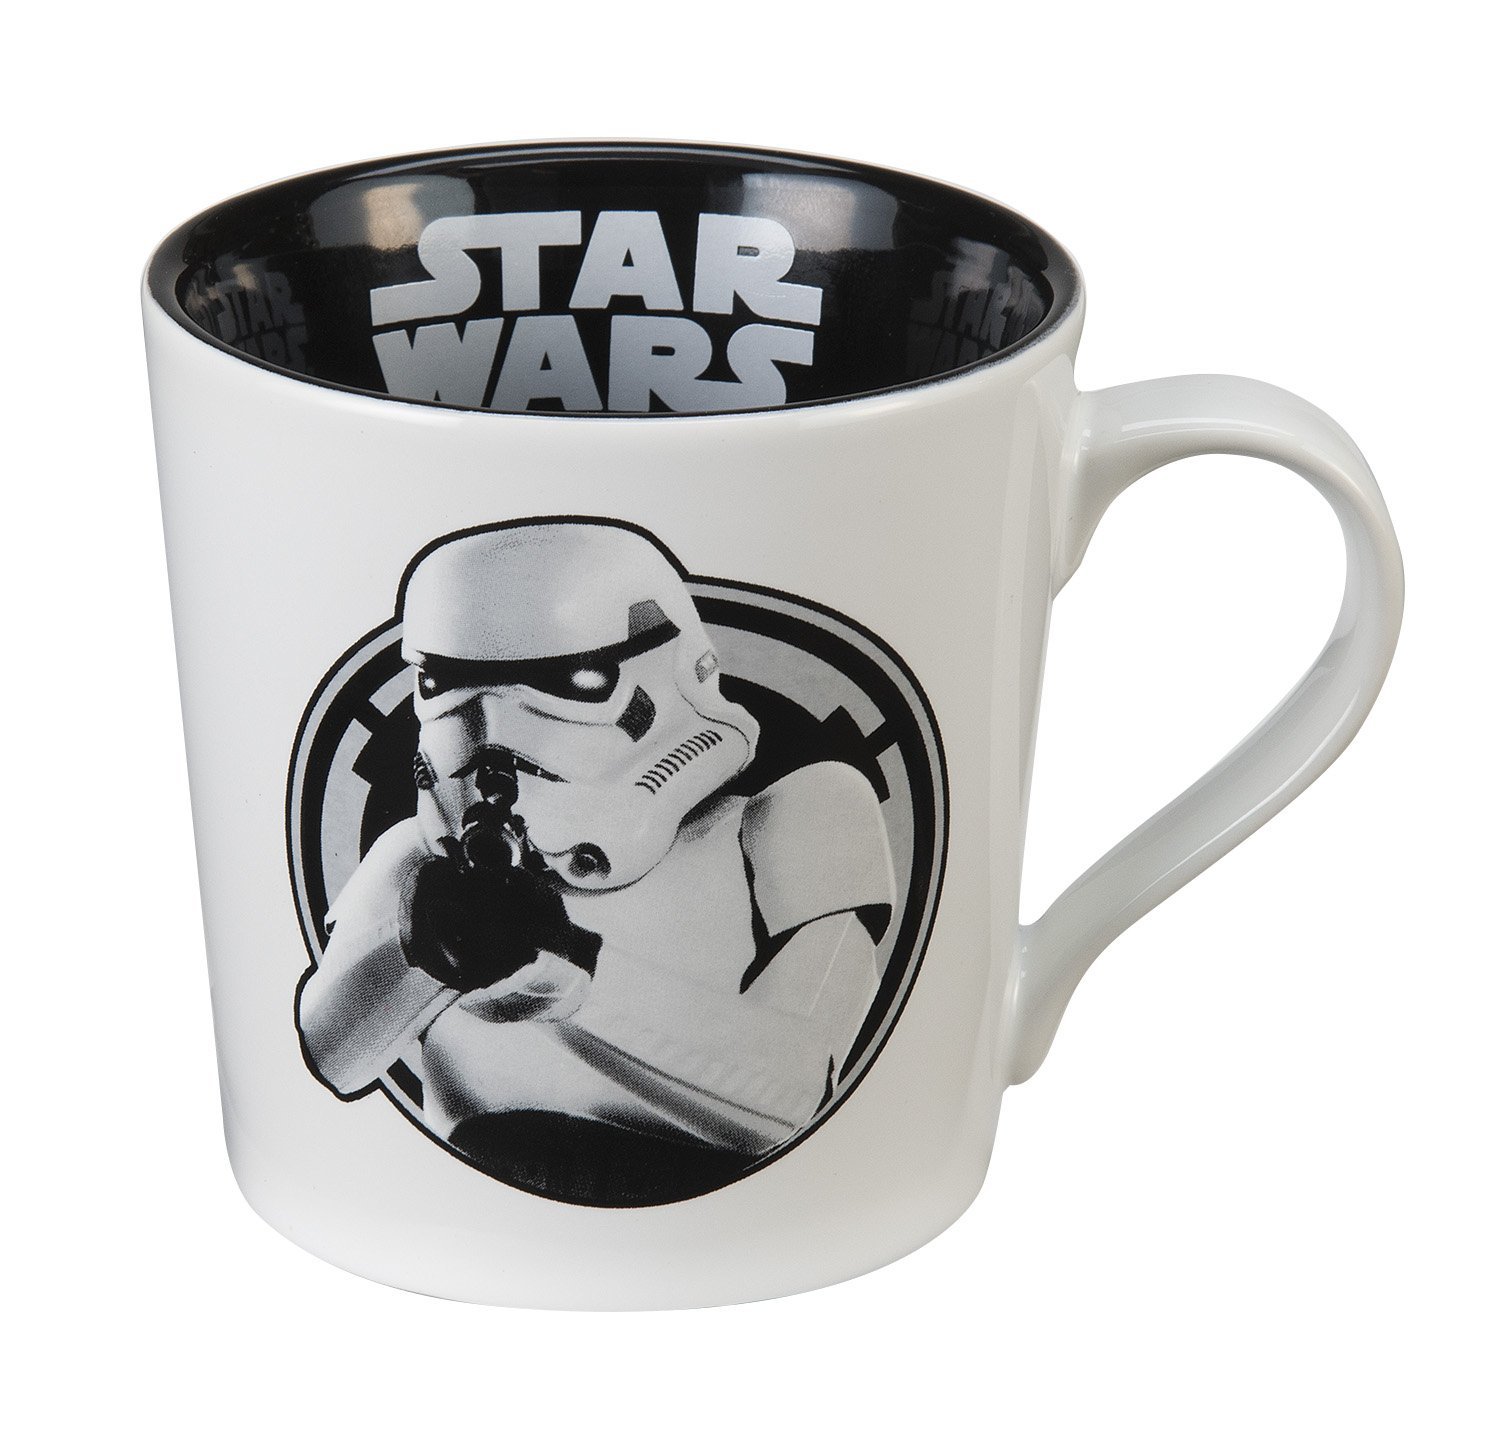 funny coffee mugs and mugs with quotes: And another Star Wars